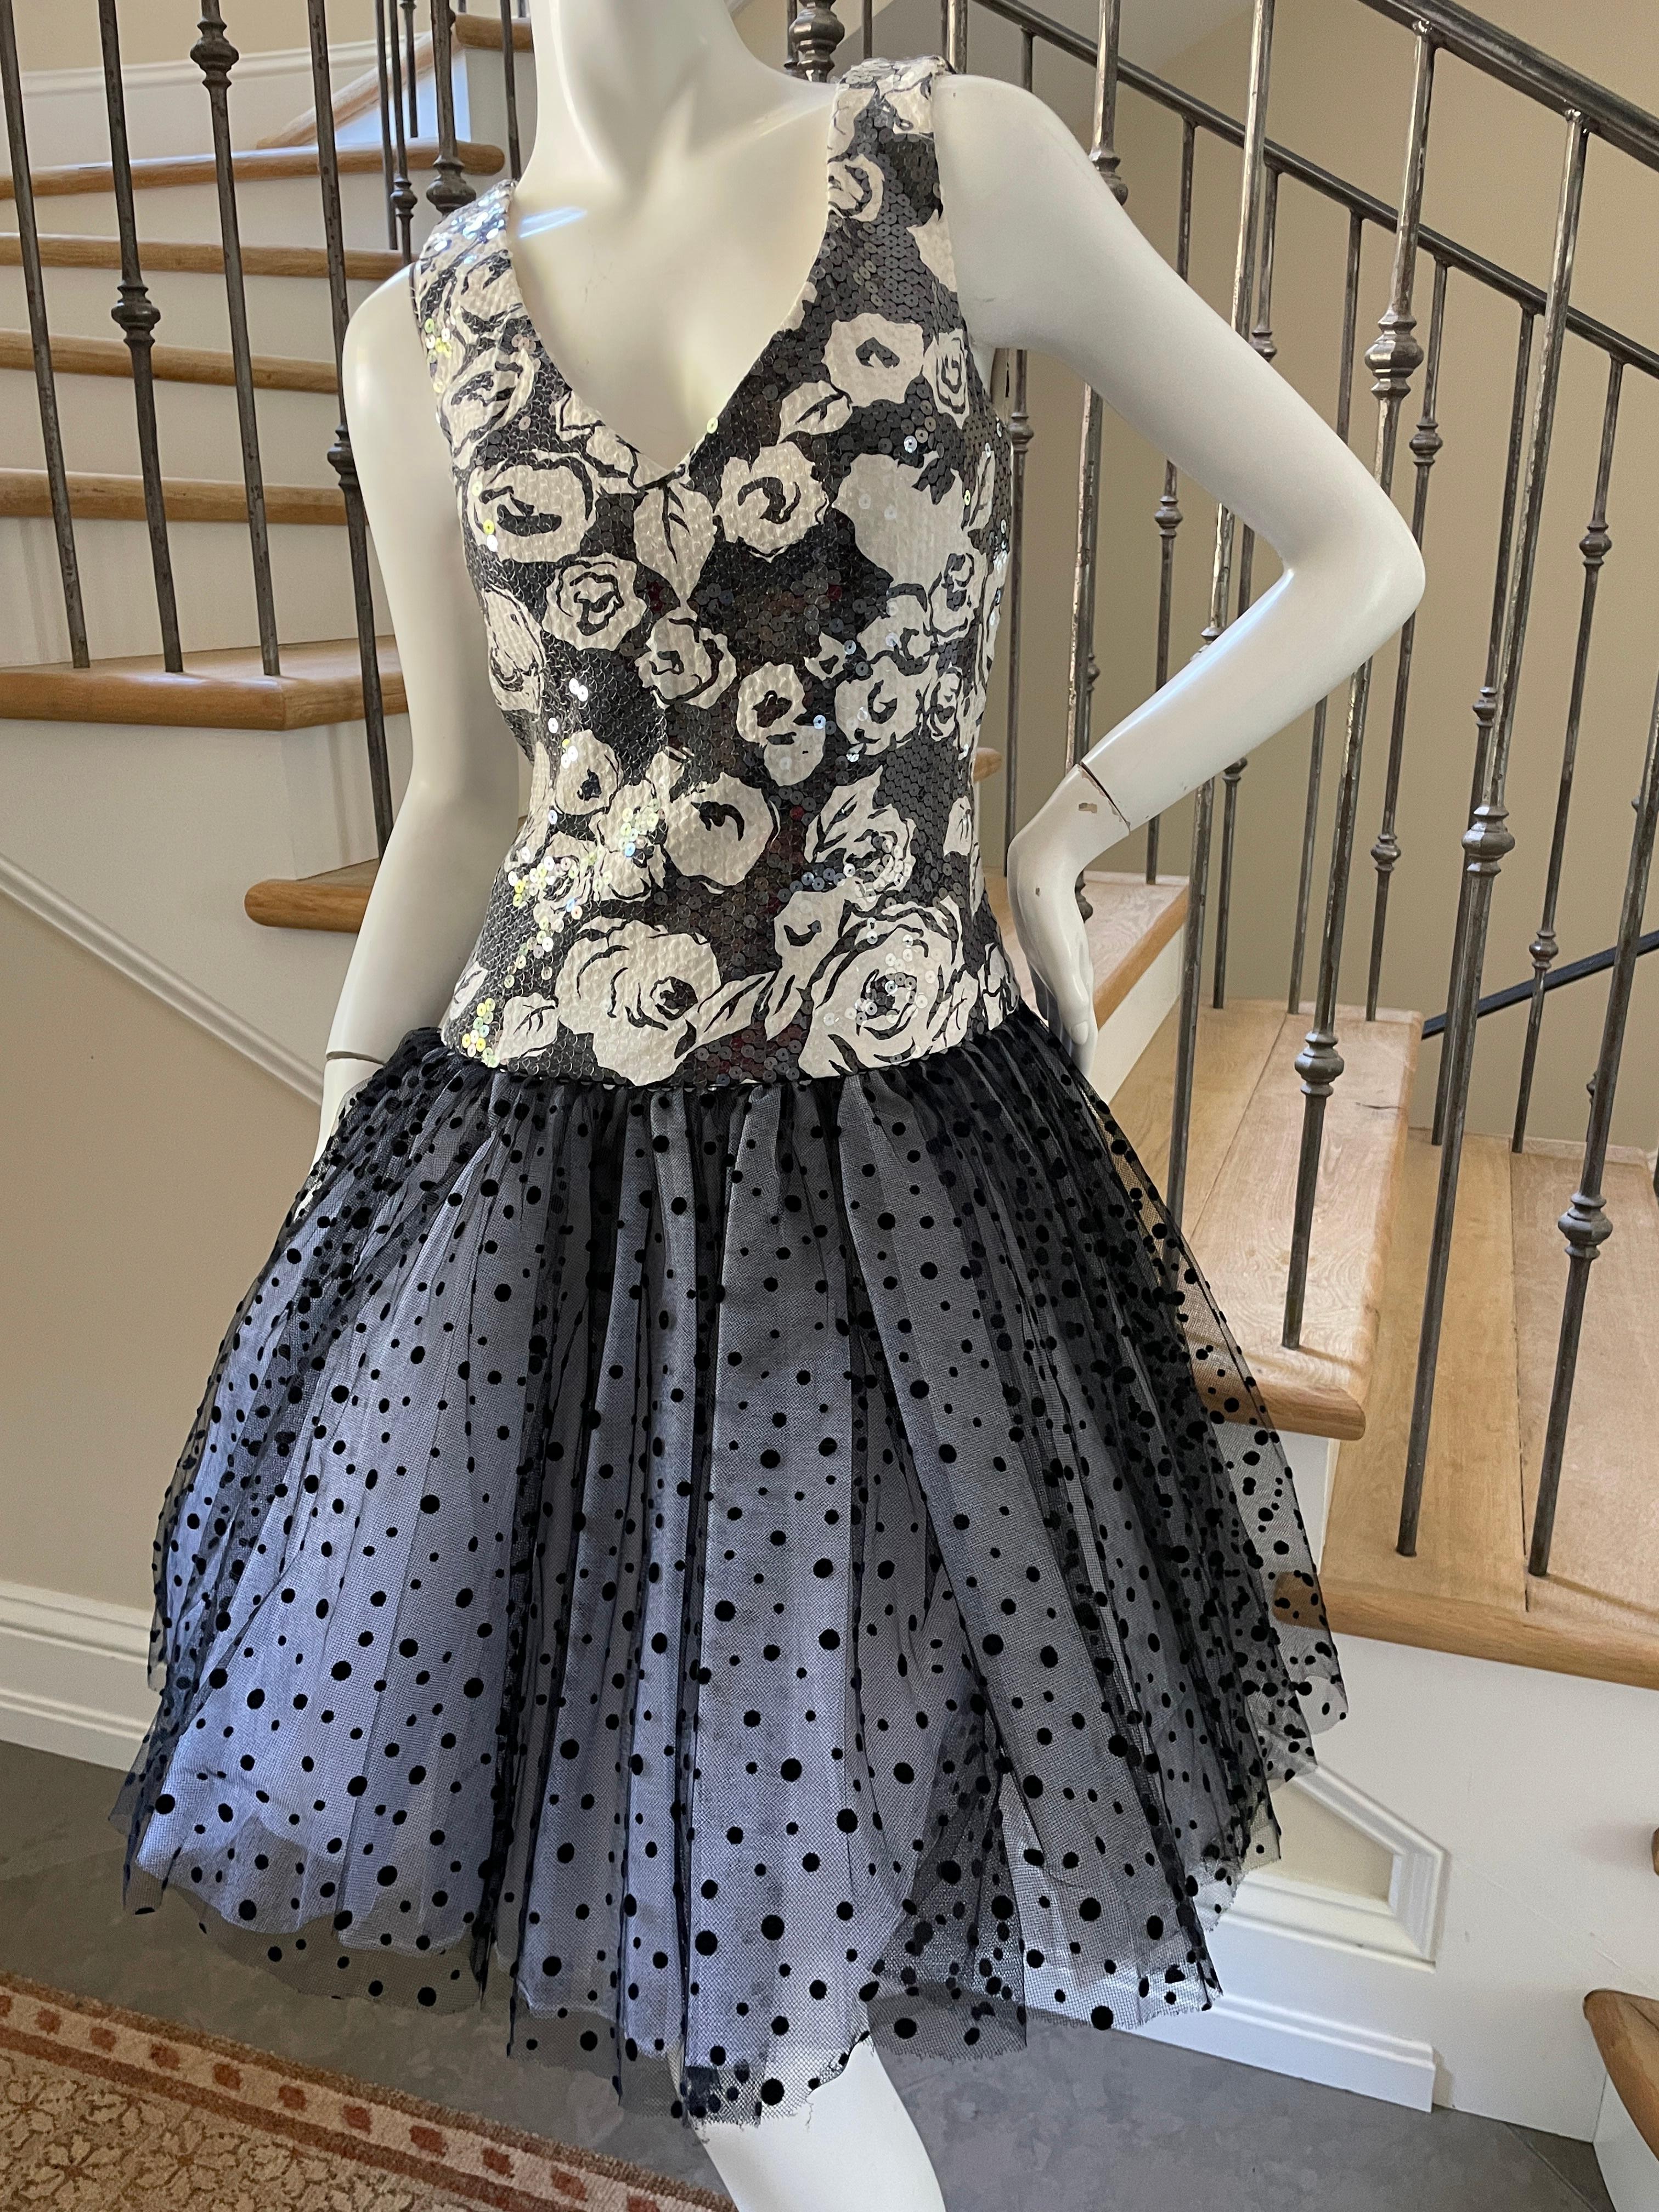 Scaasi Vintage Cocktail Dress with Floral Sequins and Polka Dot Net Ballerina Skirt.
Three layers of petticoats.
Size M (no size label)
 Bust 40